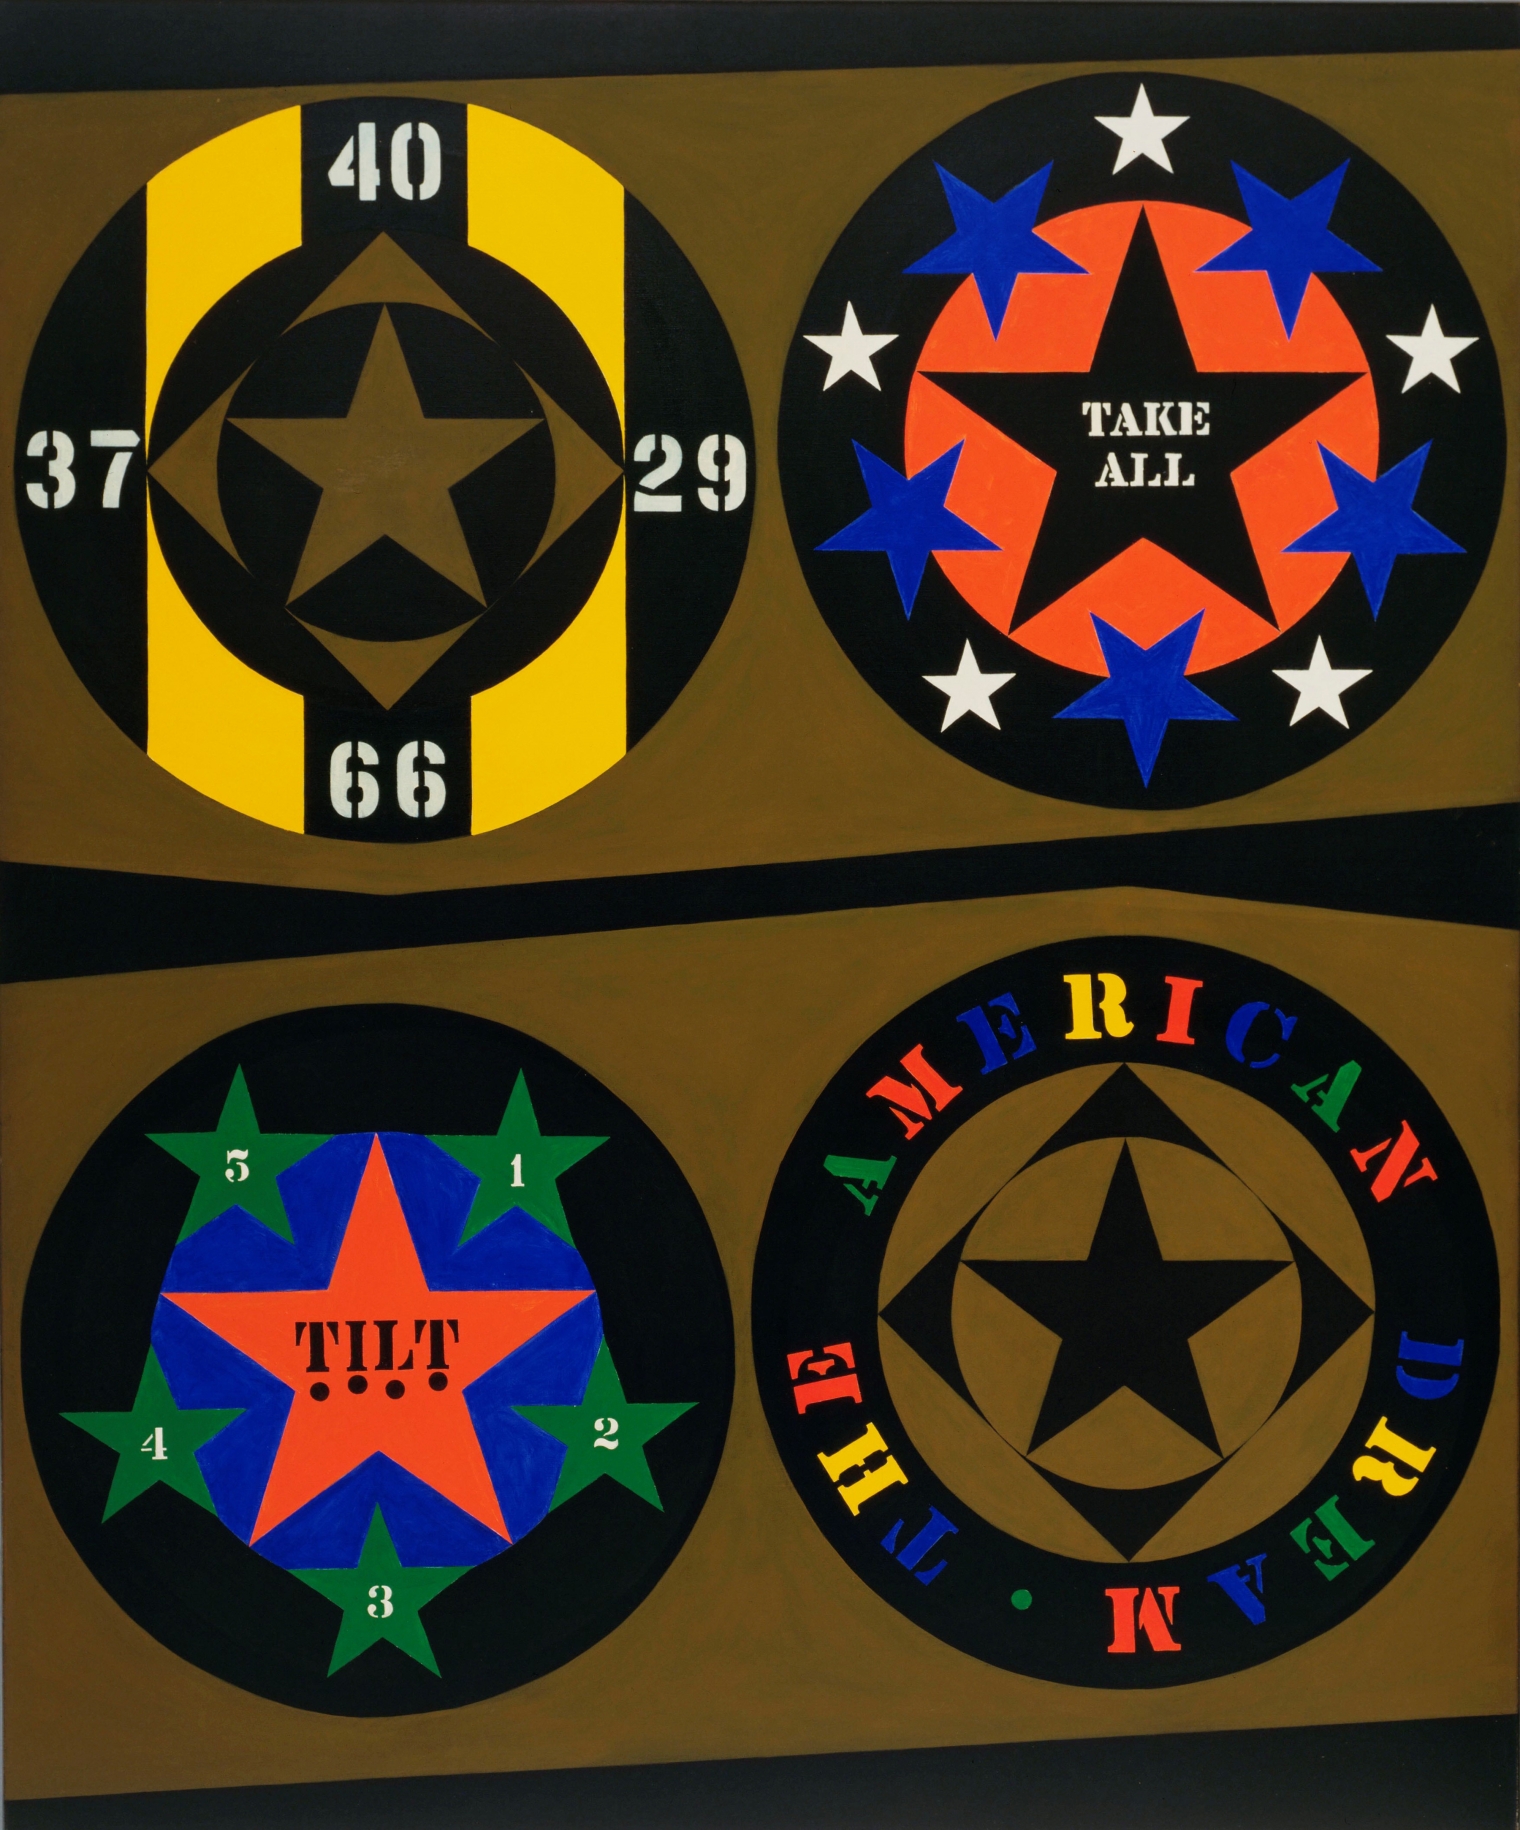 A 72 by 60 inch primarily black and brown painting with two rows of two orbs, each containing a star, as well as references to major American highways and pinball machines. The work's title, "The American Dream," appears in multicolored stenciled letters in a ring around the lower right hand orb